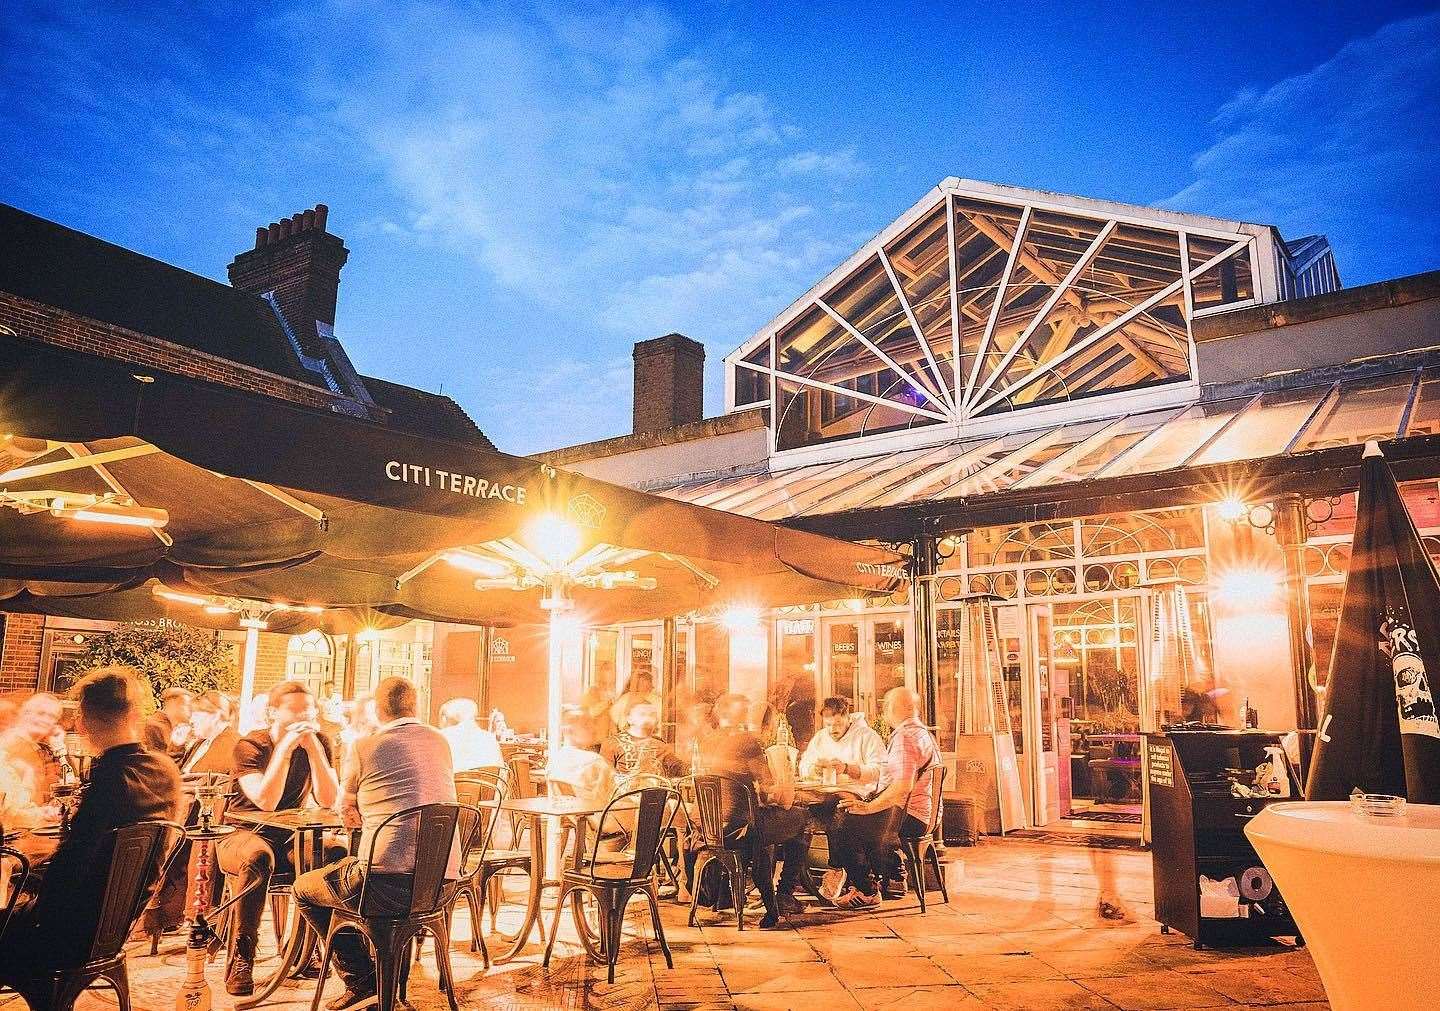 Get lost in the city atmosphere at the rooftop bar at Citi Terrace in Canterbury. Picture: Facebook/Citi Terrace